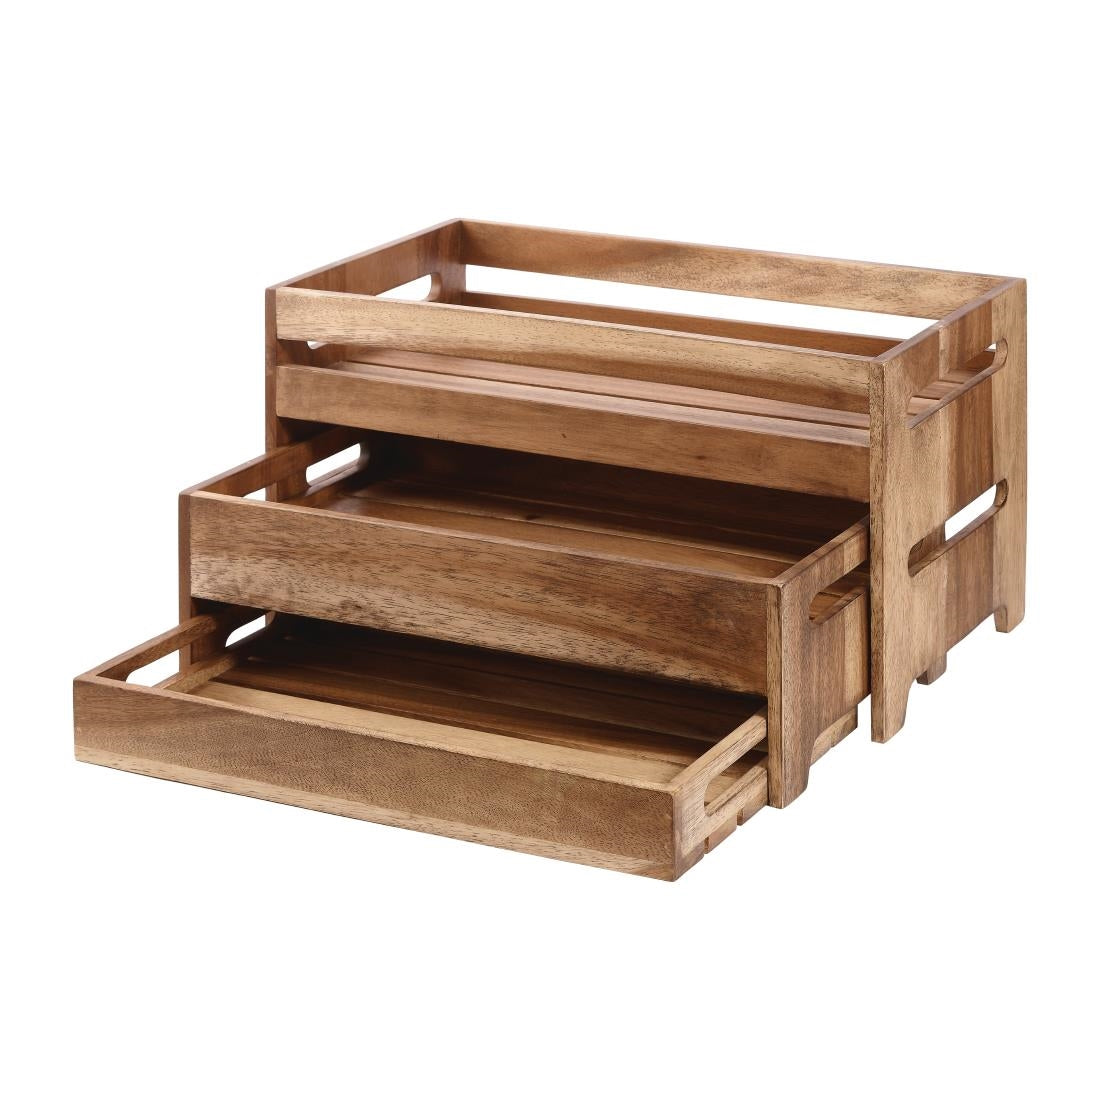 CY740 Churchill Wood Small Rustic Nesting Crate JD Catering Equipment Solutions Ltd